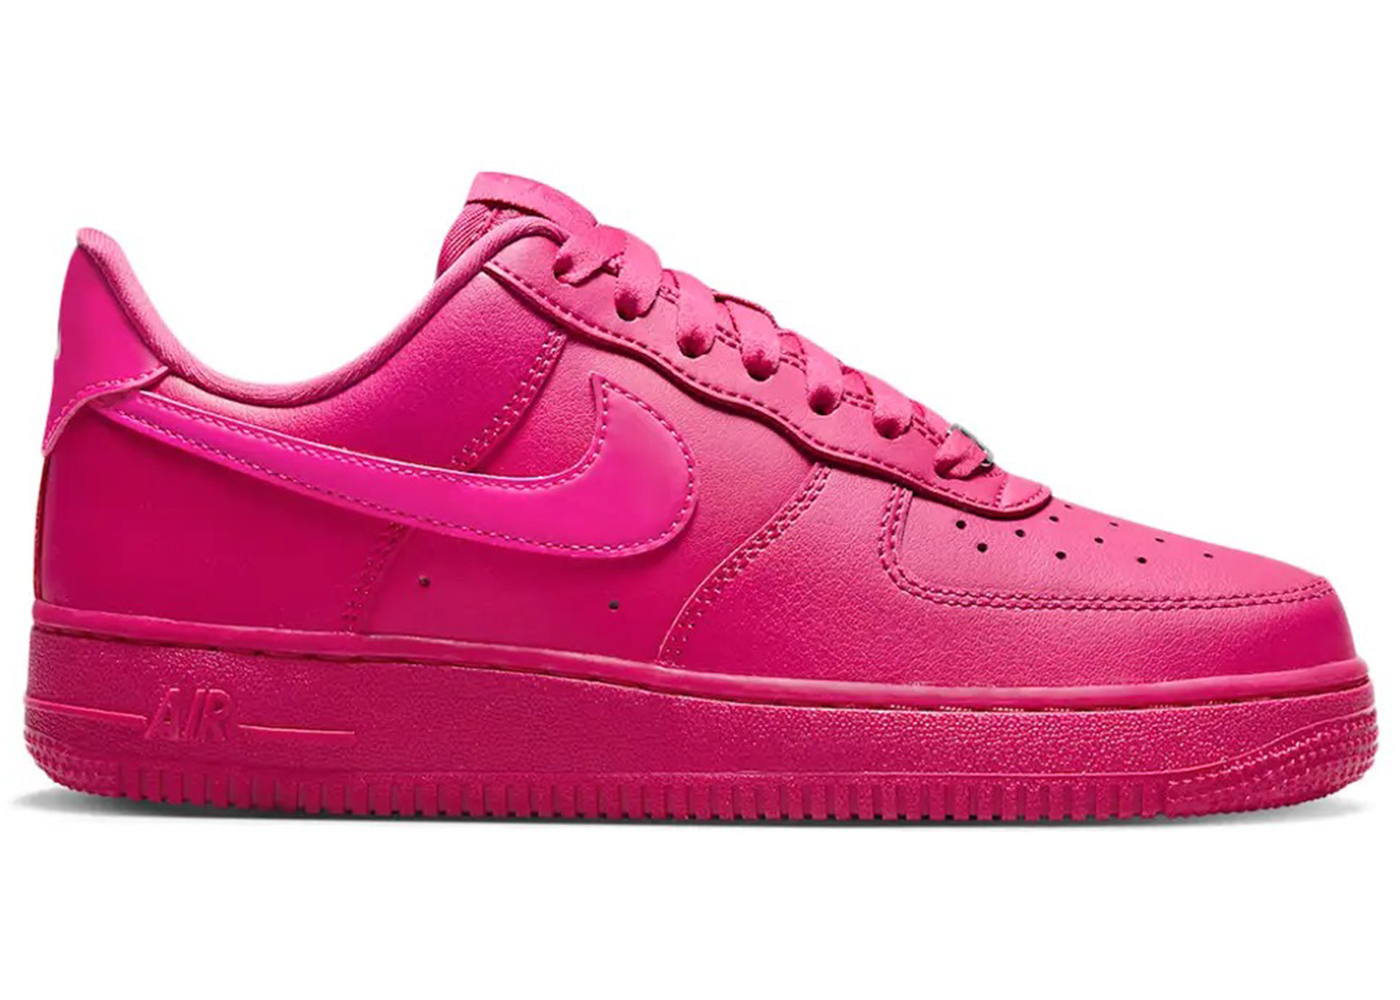 NikeAir Force 1 Low Fireberry ファイヤーベリー-